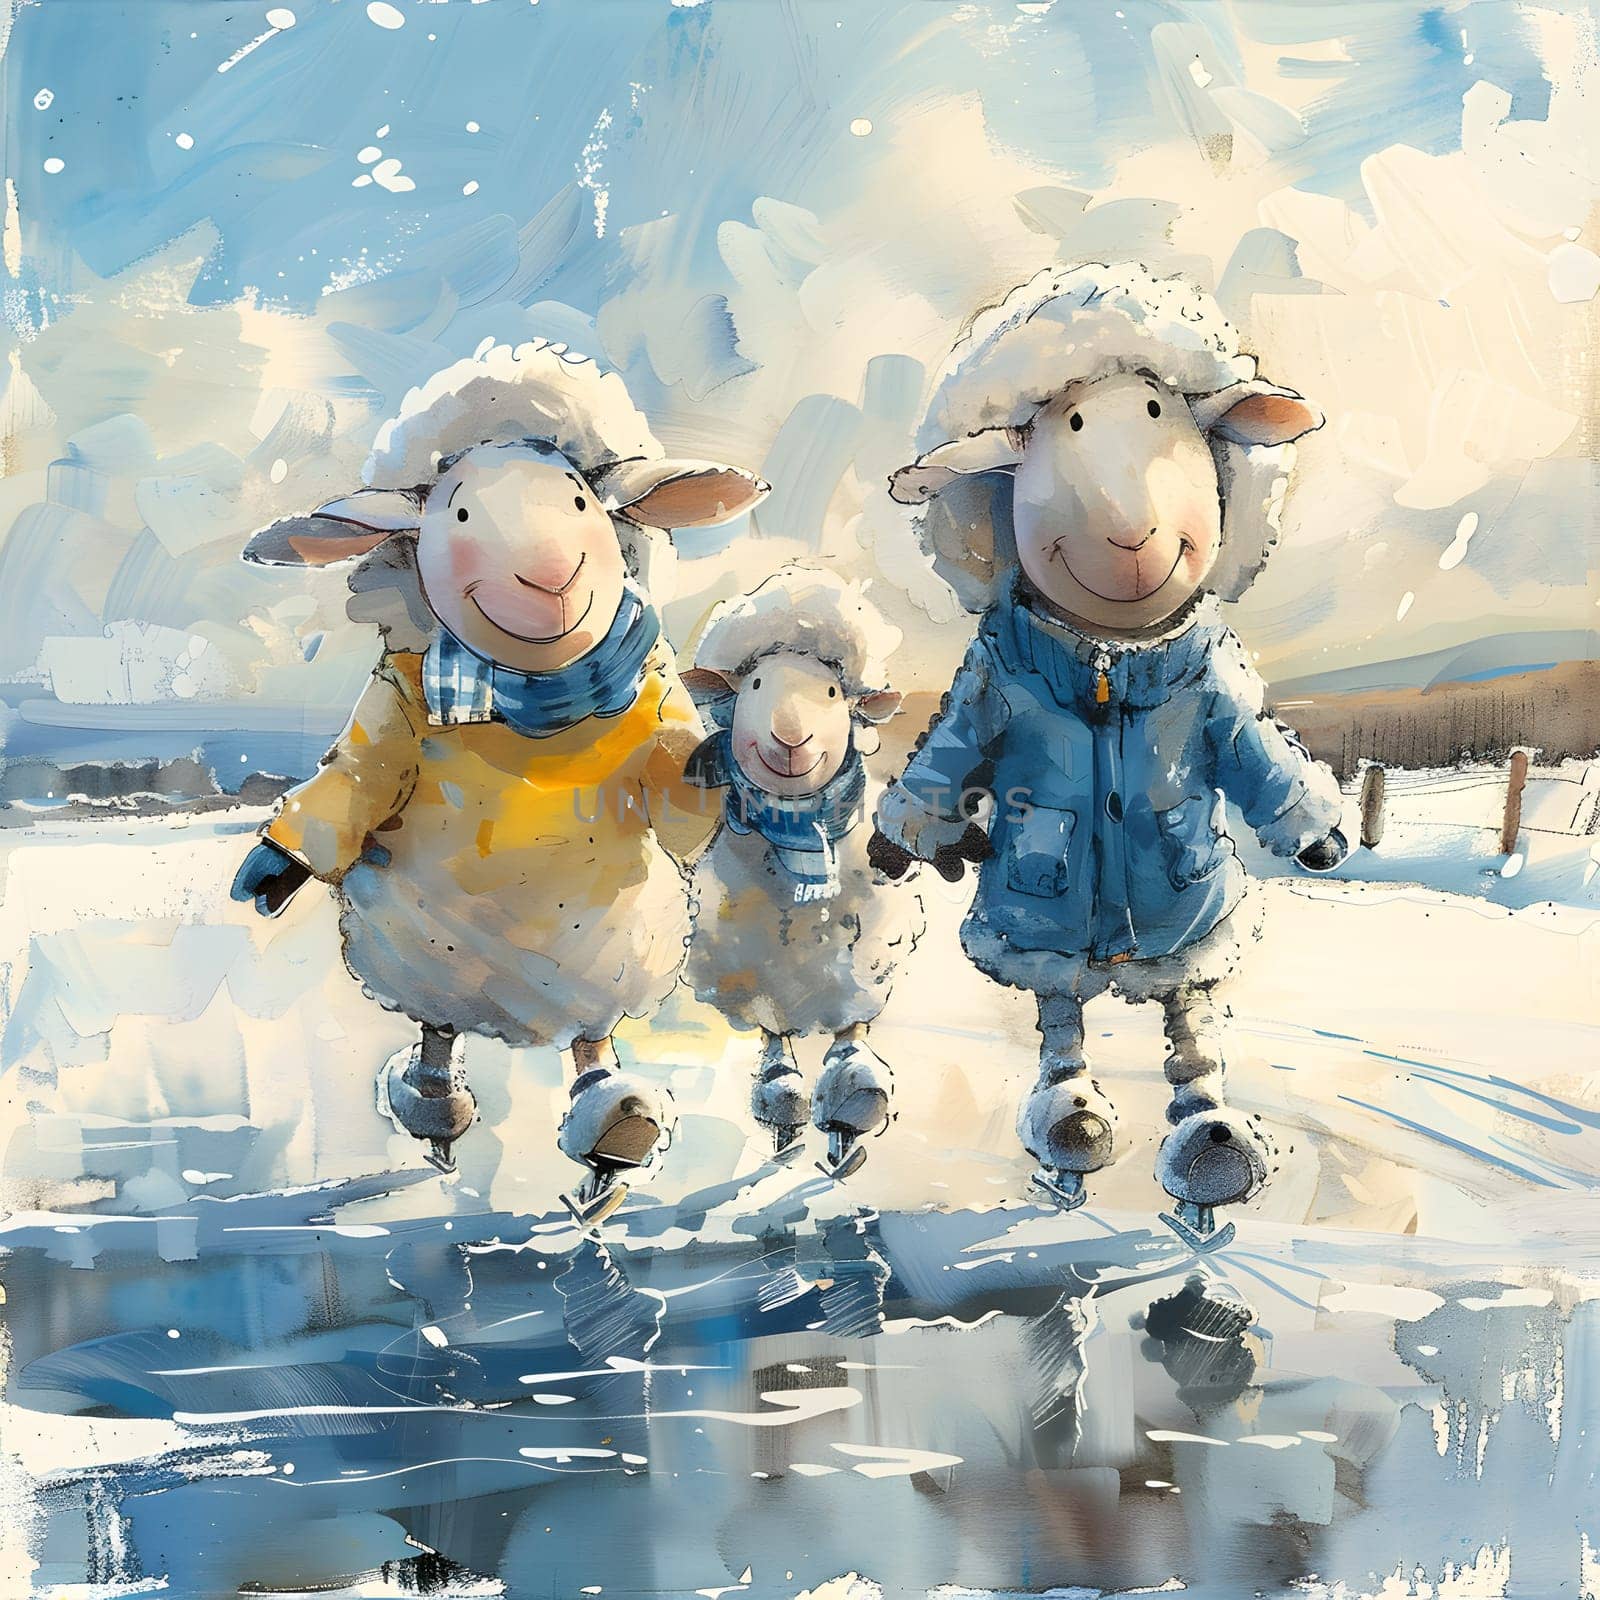 A whimsical painting depicting three cartoon sheep happily ice skating in the snowy landscape, under a sky filled with fluffy clouds